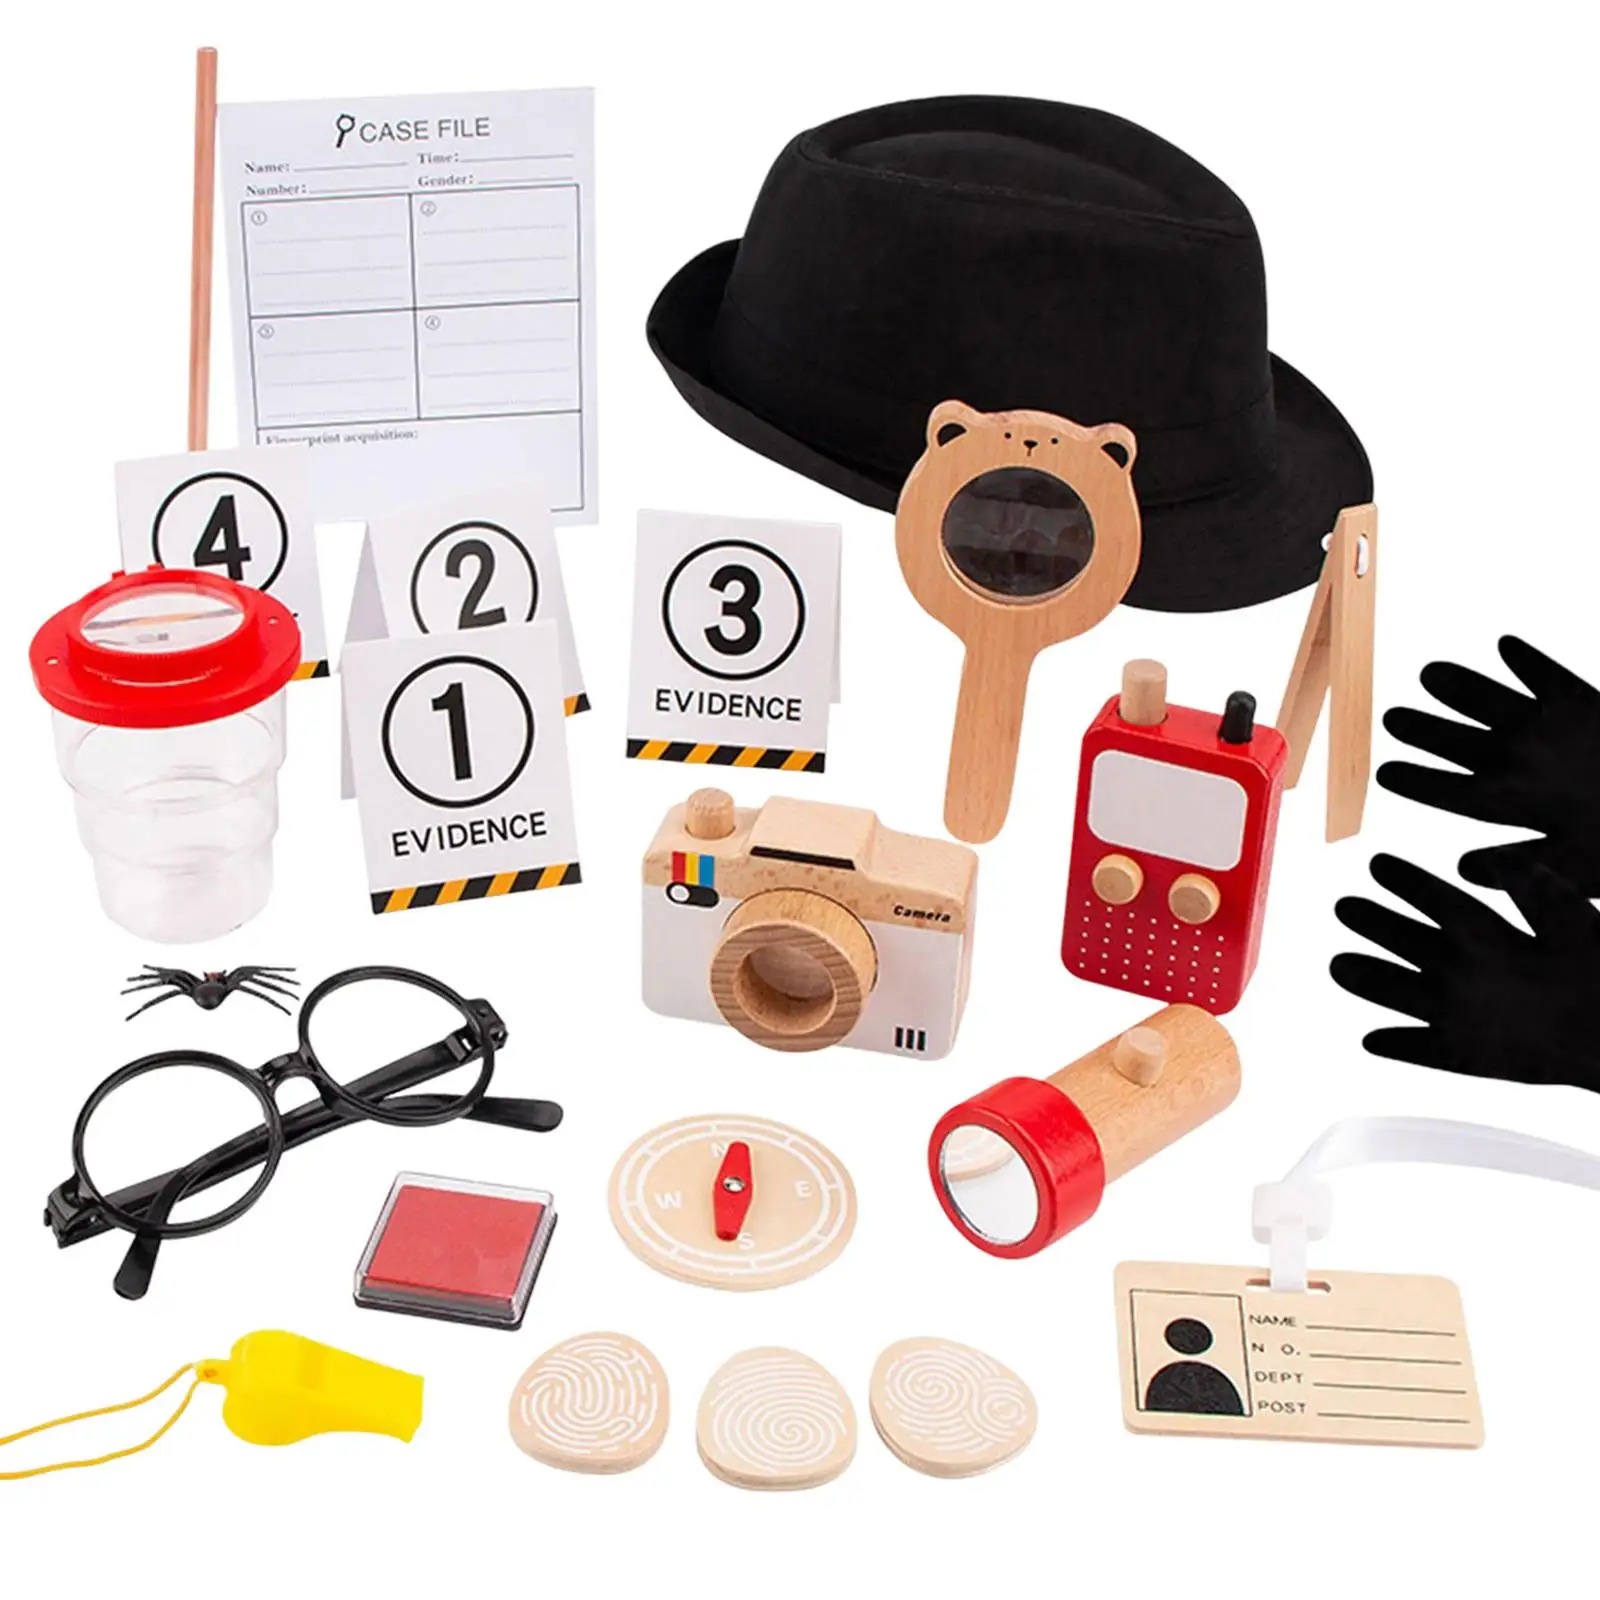 Detective Costume Children Stem Toy Educational Toy for 4-6 Years Old Unisex